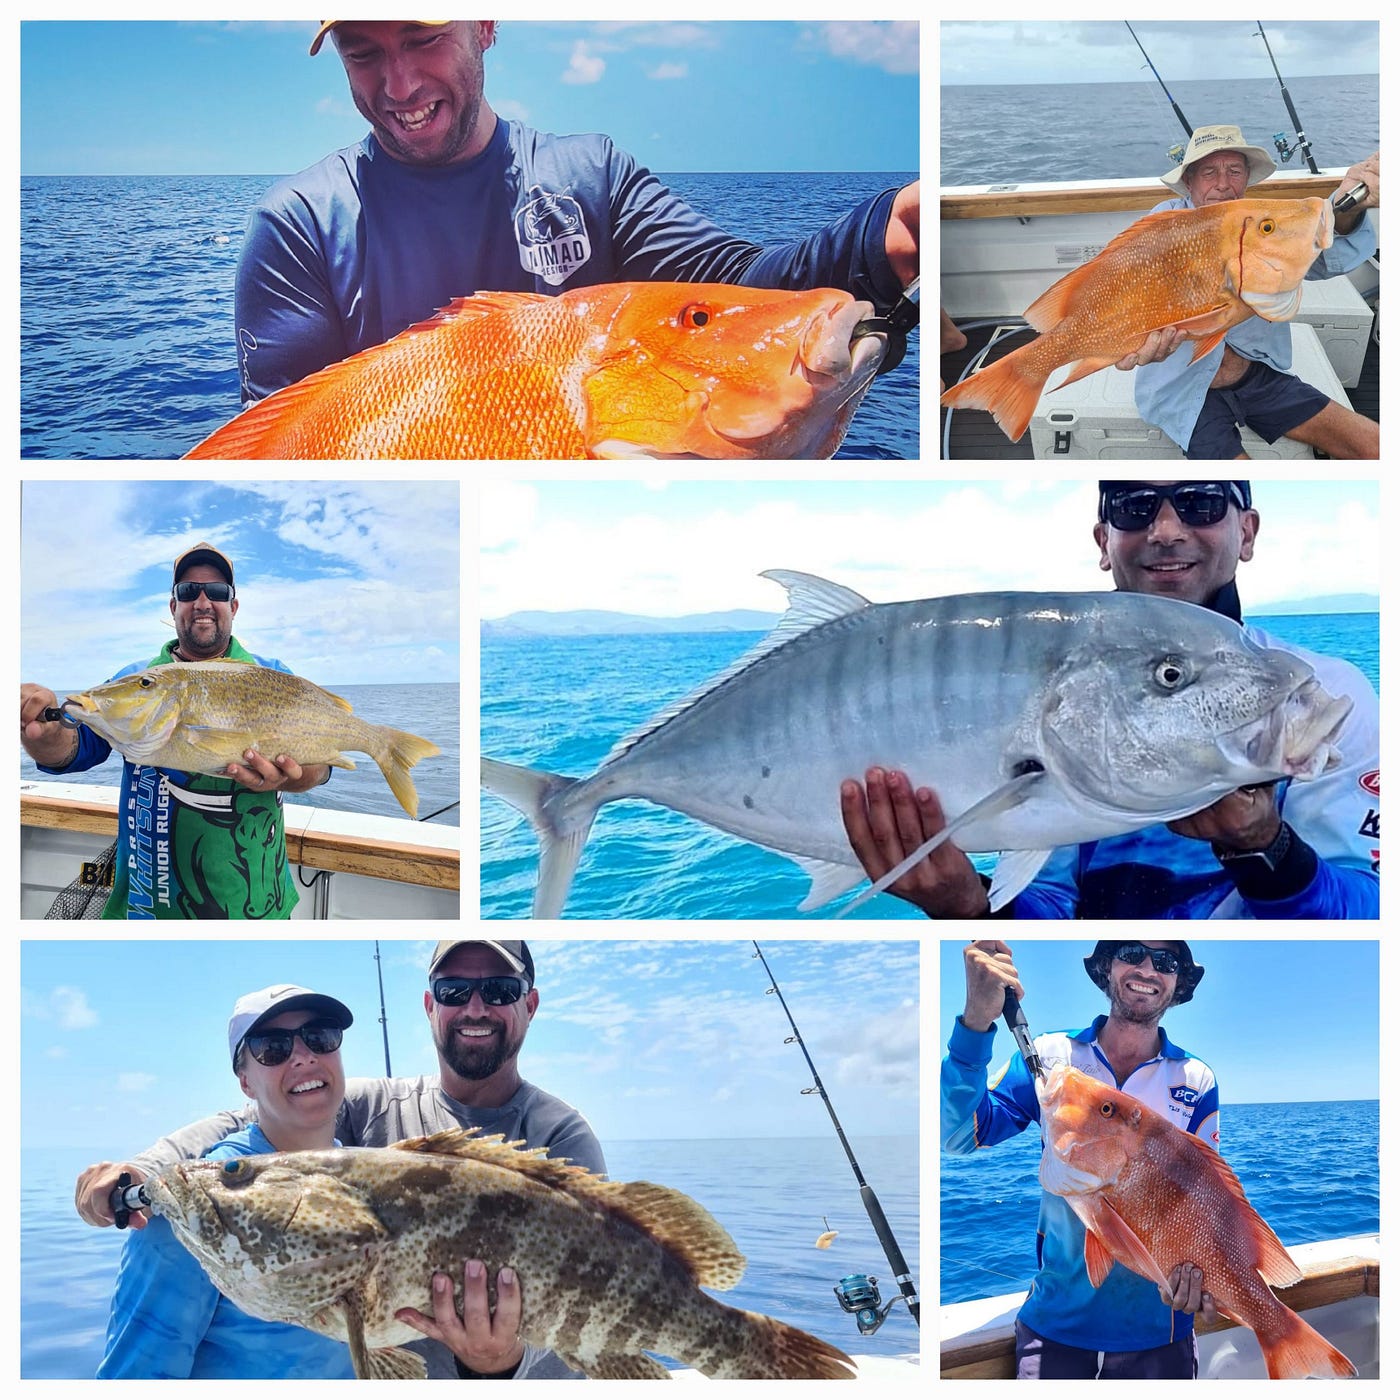 Looking for a charters with good fishing techniques skills